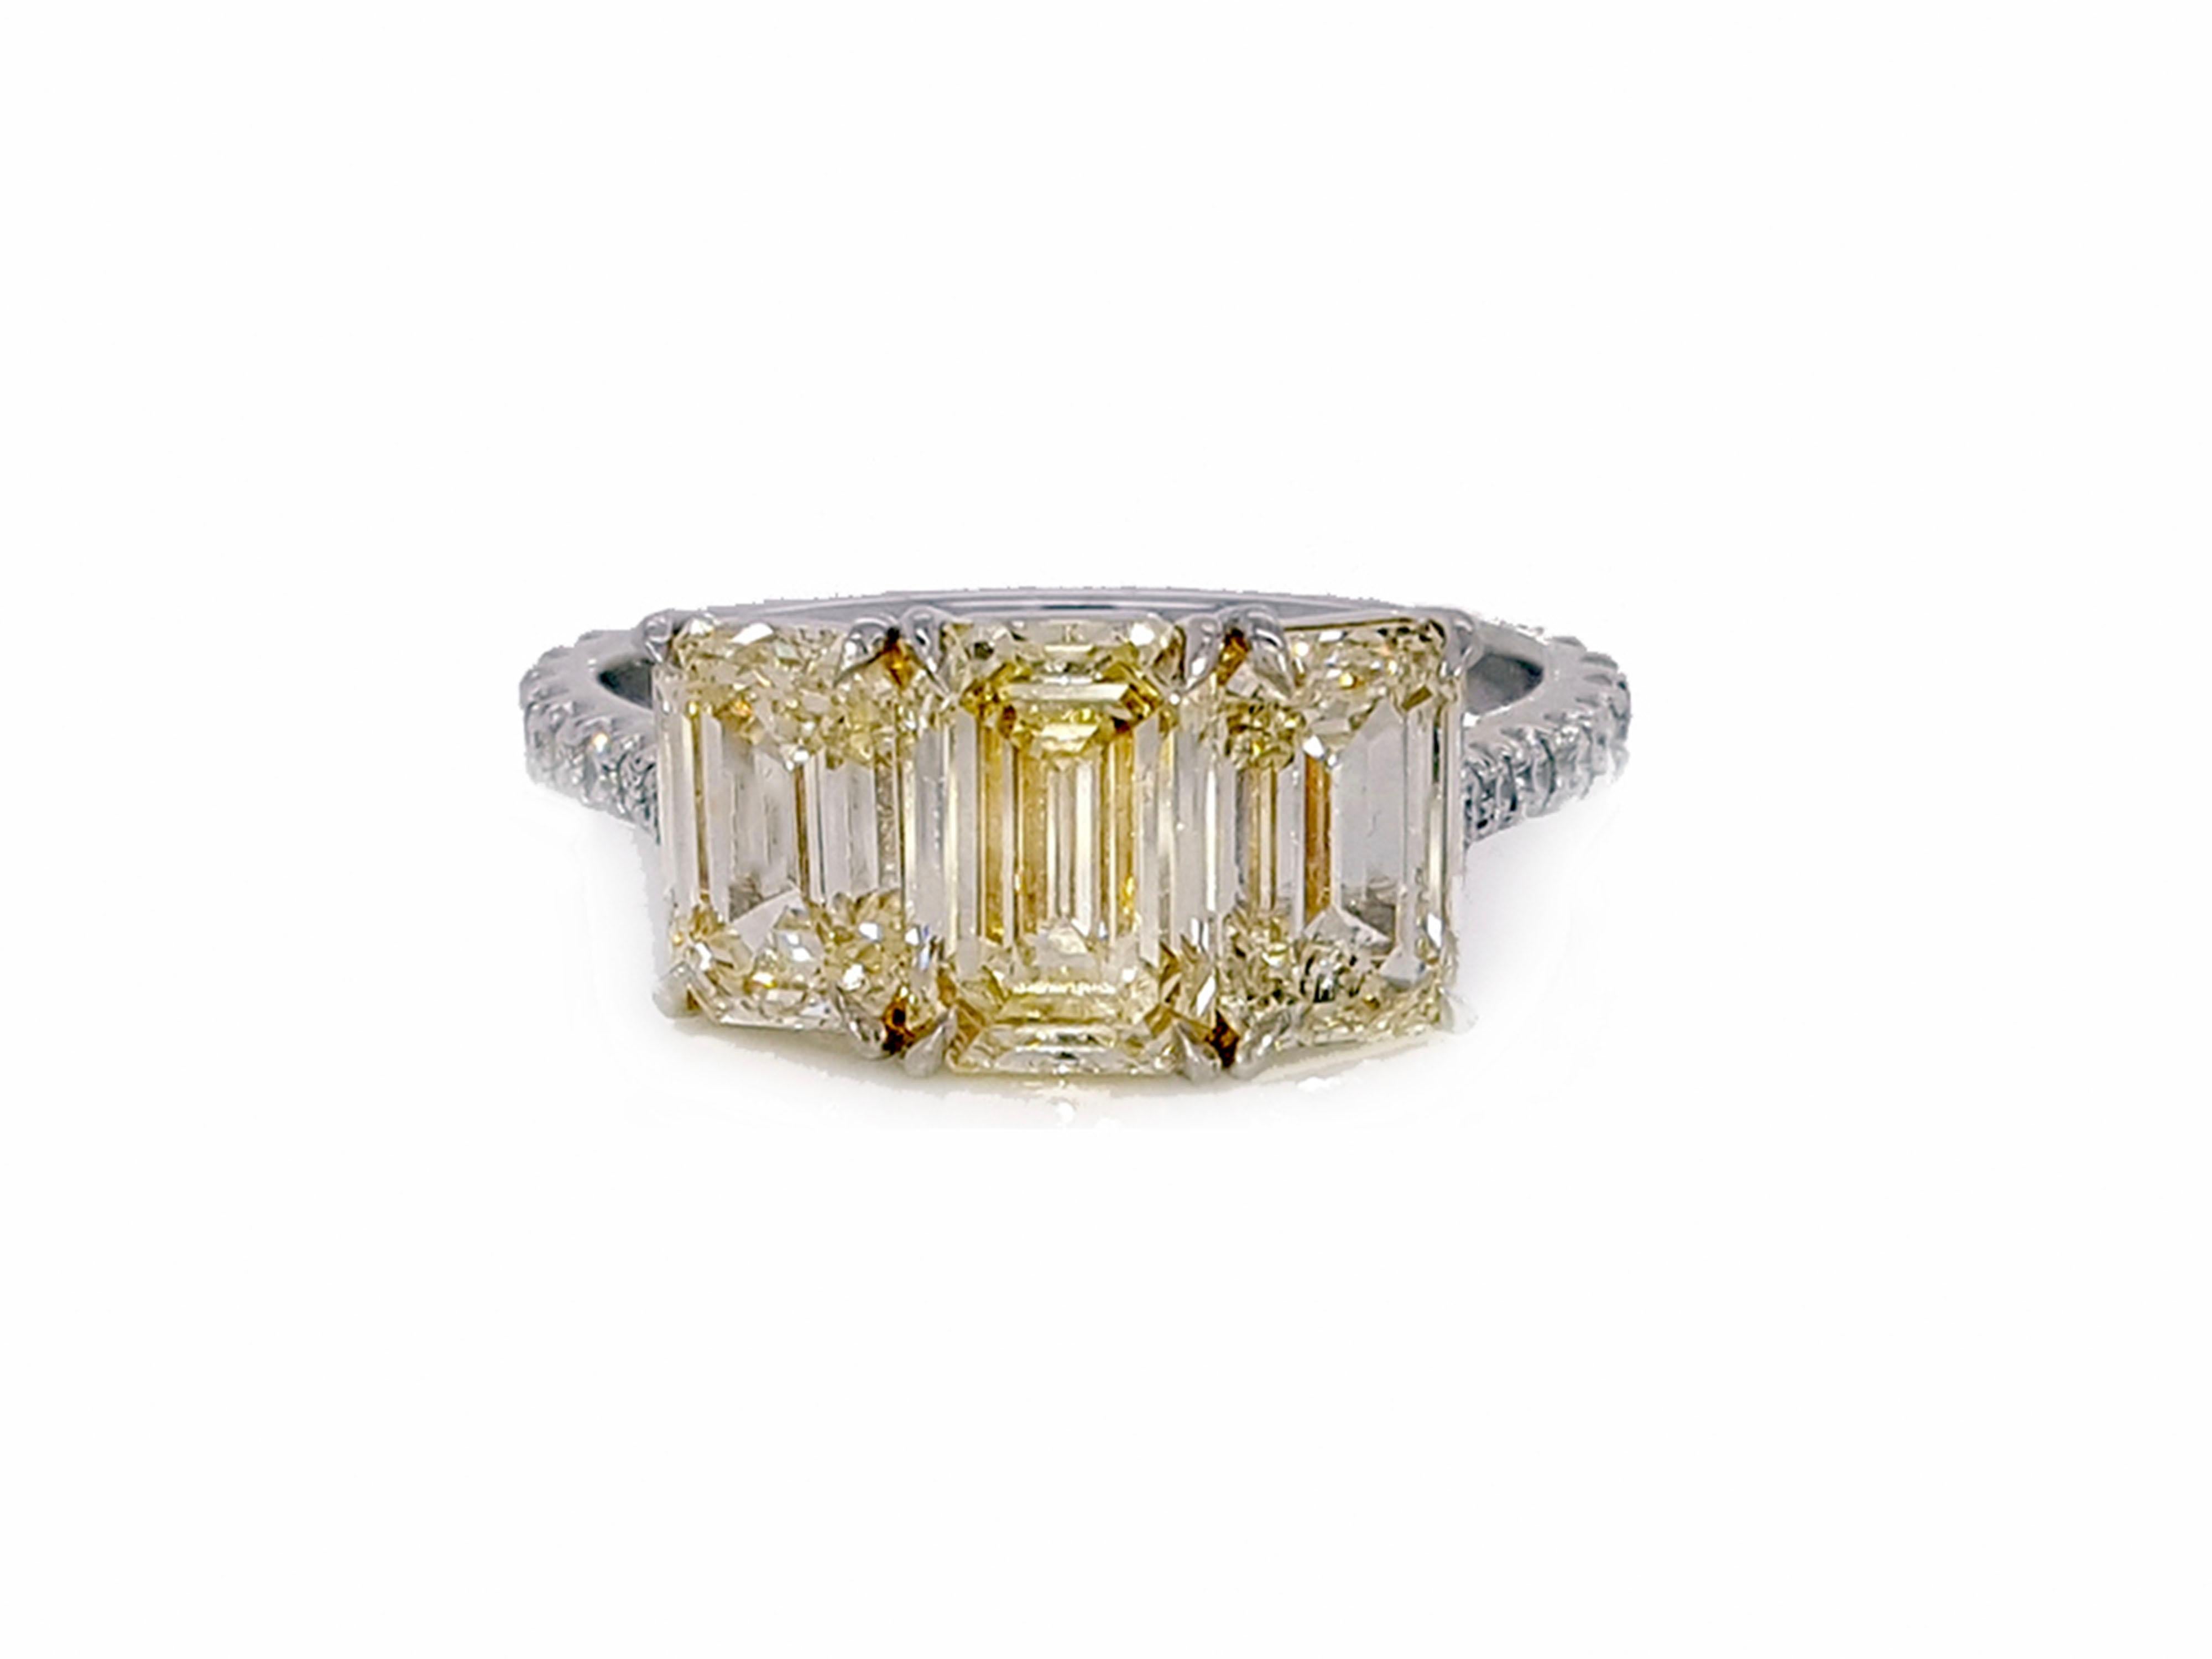 3.35 Carat Yellow Diamond Emerald Cut Three-Stone Engagement Ring, Platinum. In New Condition For Sale In New York, NY